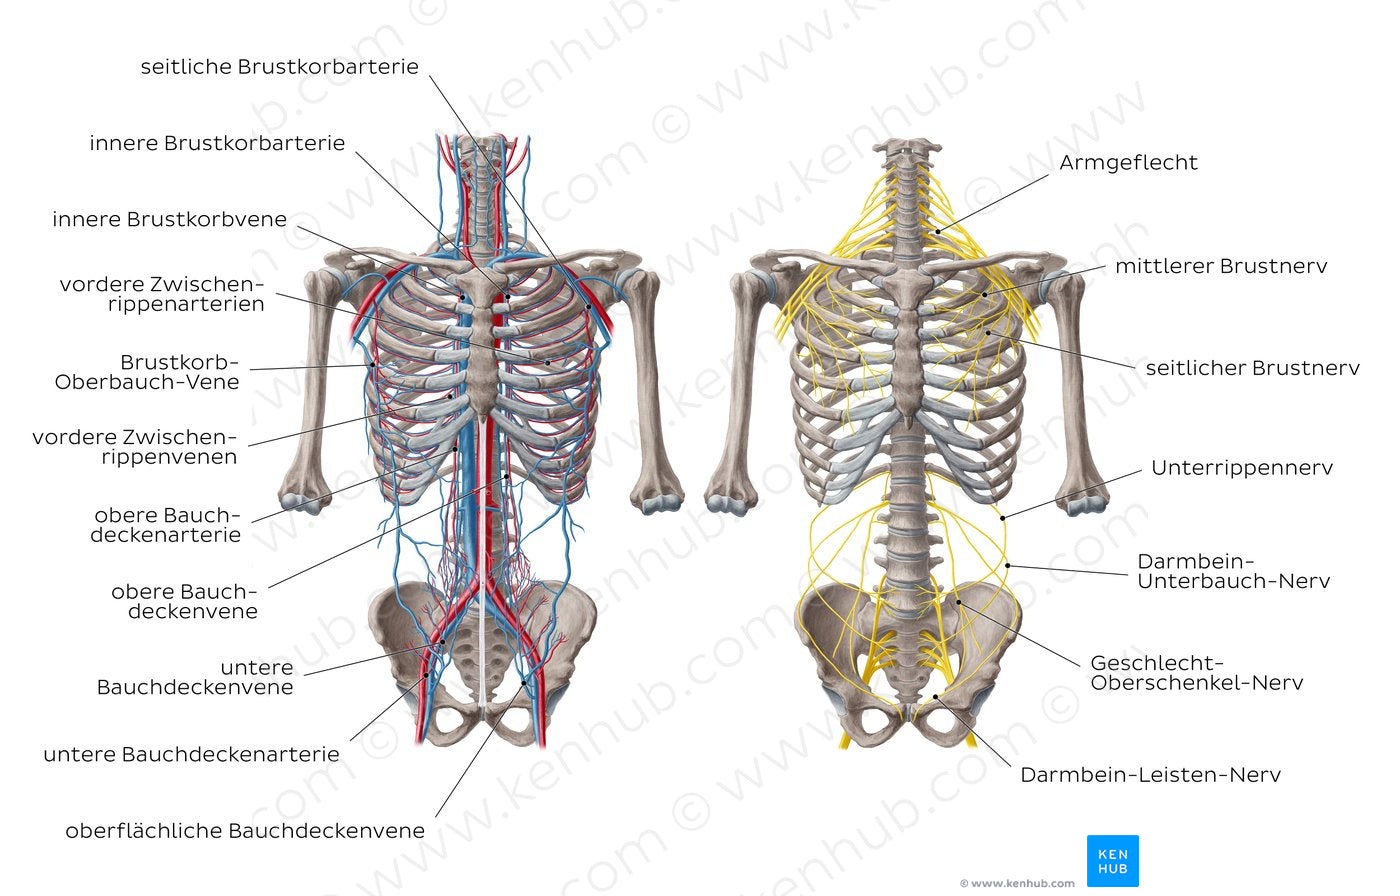 Nerves and vessels of the anterior thoracic wall (German)